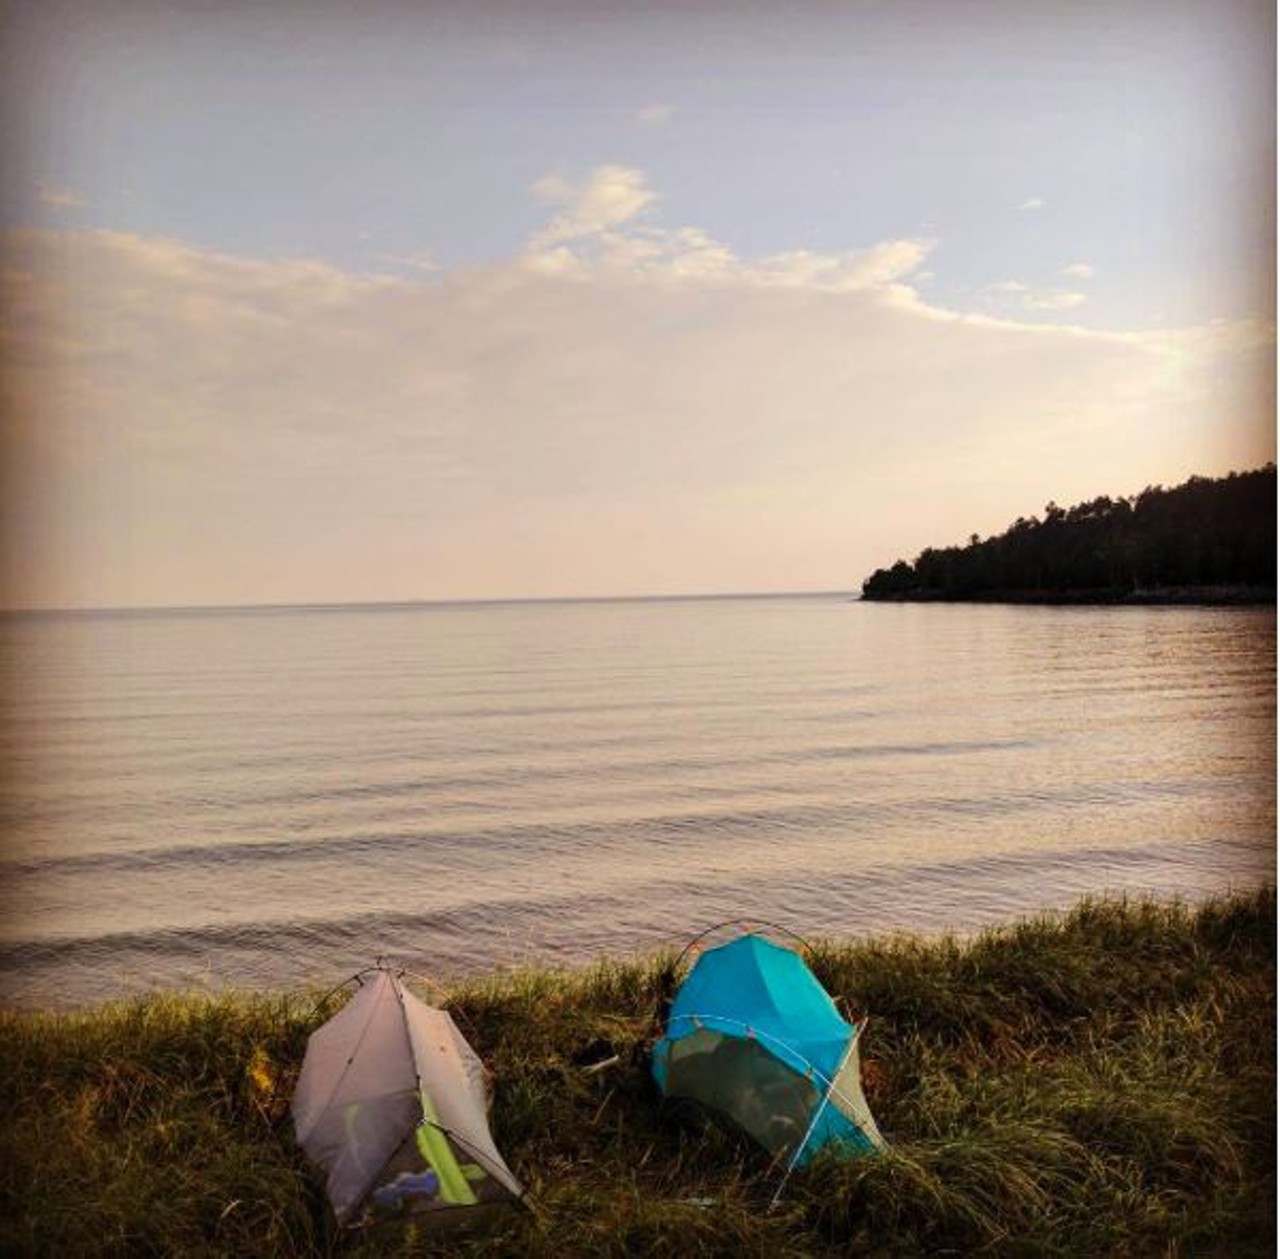 Little Presque Isle
Marquette; 7 hours, 8 minutes
The beach at Little Presque Isle may be among many in this bustling UP city, but it&#146;s lesser known among tourists, making it the perfect place to uproot yourself from civilization. Free for day trips.
Photo via IG user @thrift.wise